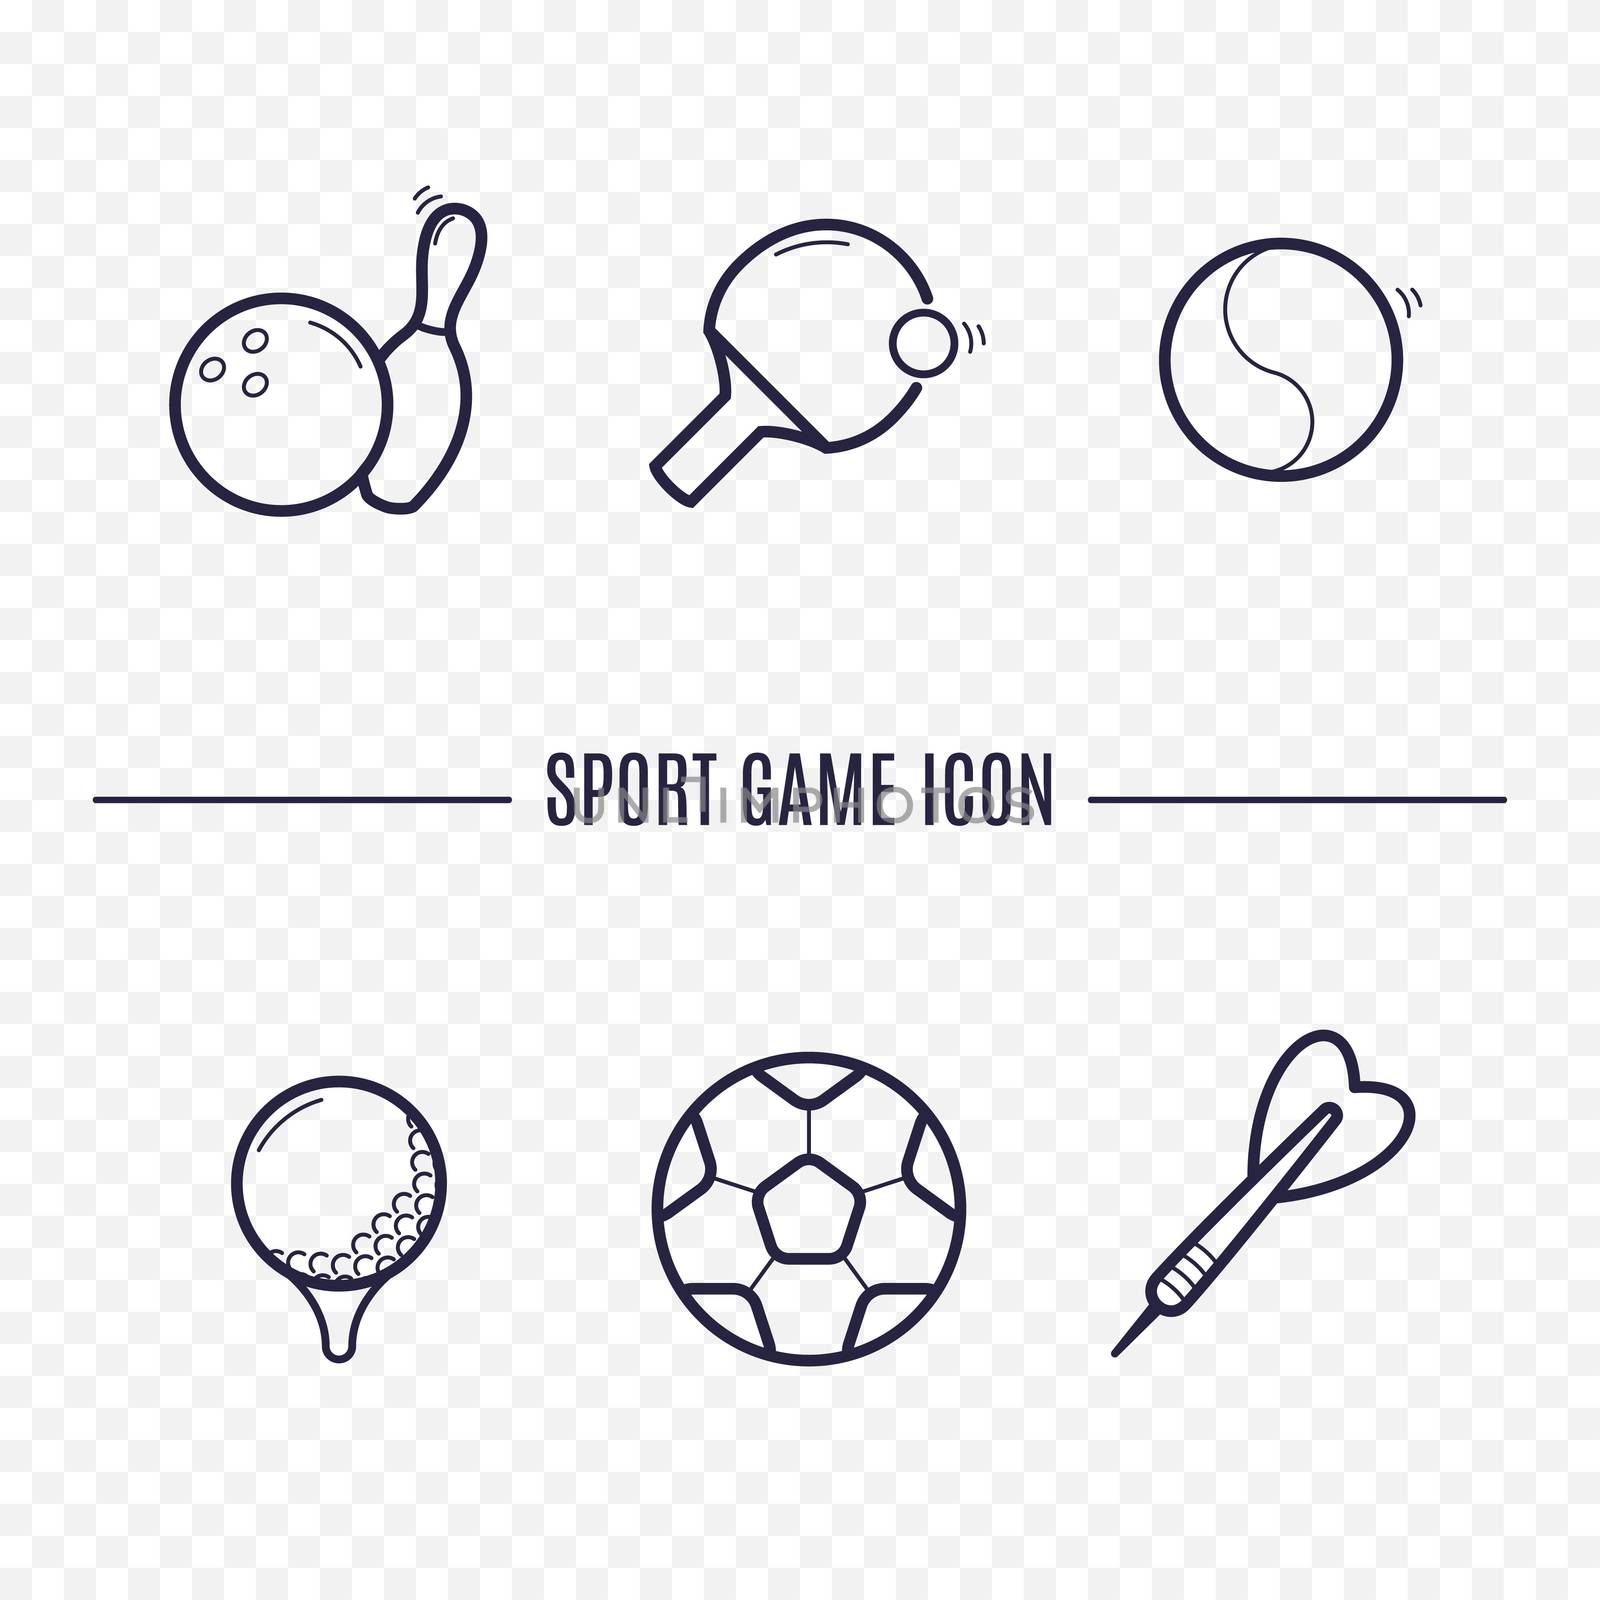 Games linear icons. Chess, dice, cards, checkers and other board games. Game thin linear signs. Outline concept for websites, infographic, mobile app.